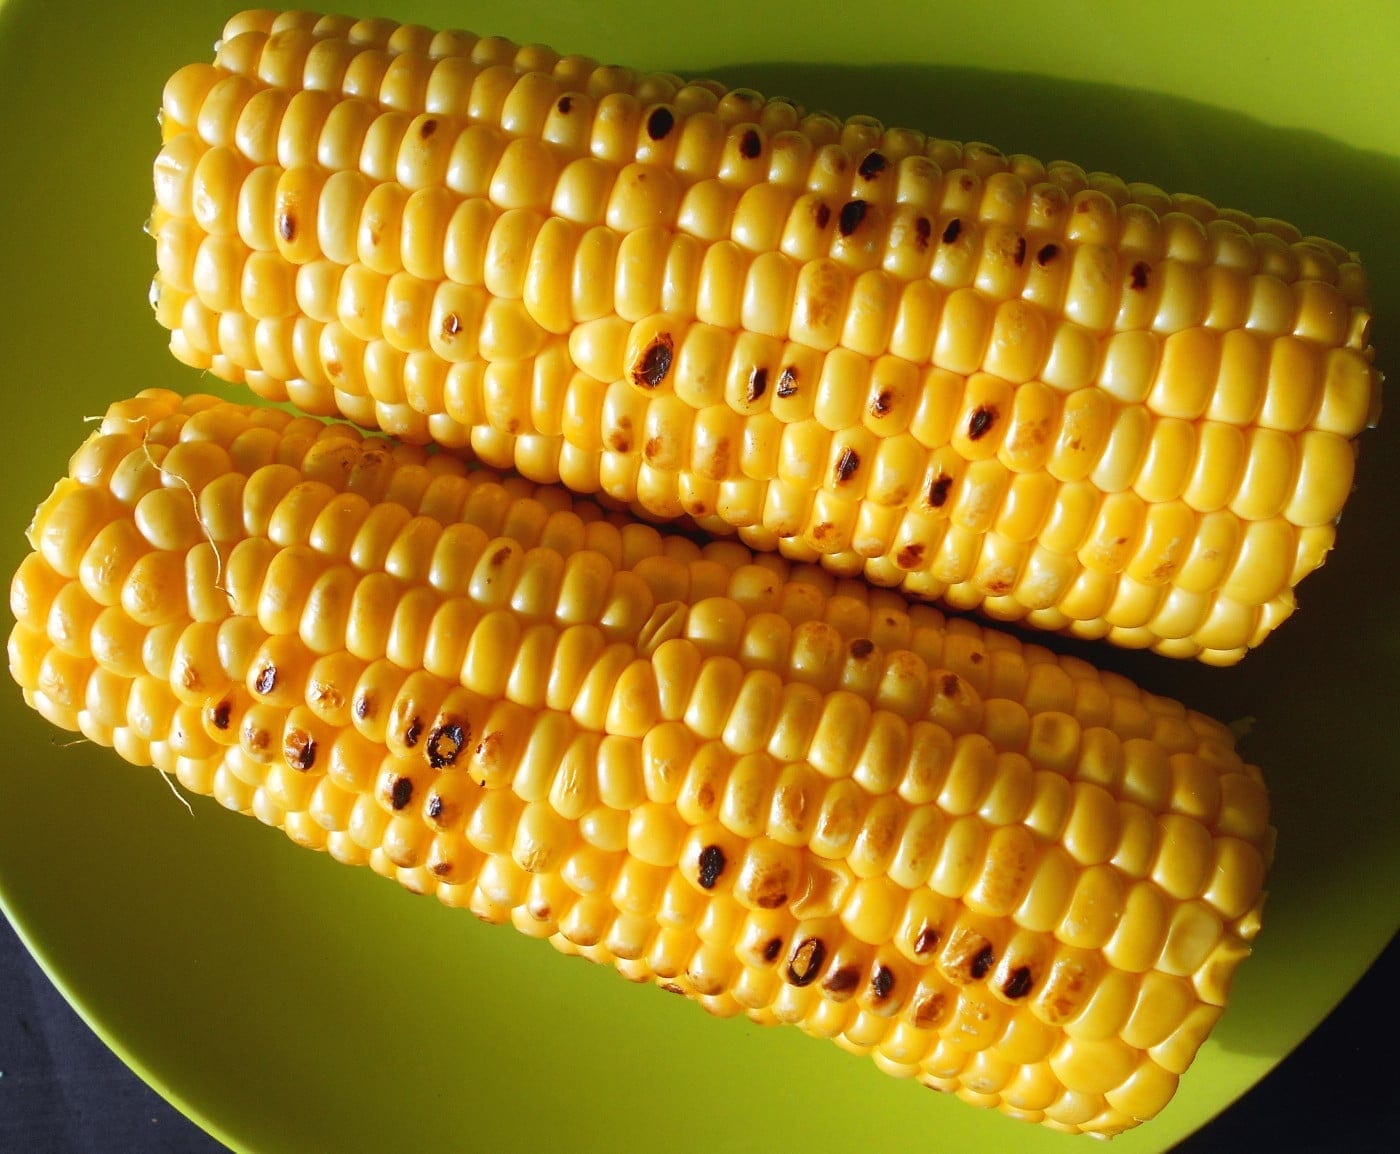 Two ears of grilled corn on a green plate.